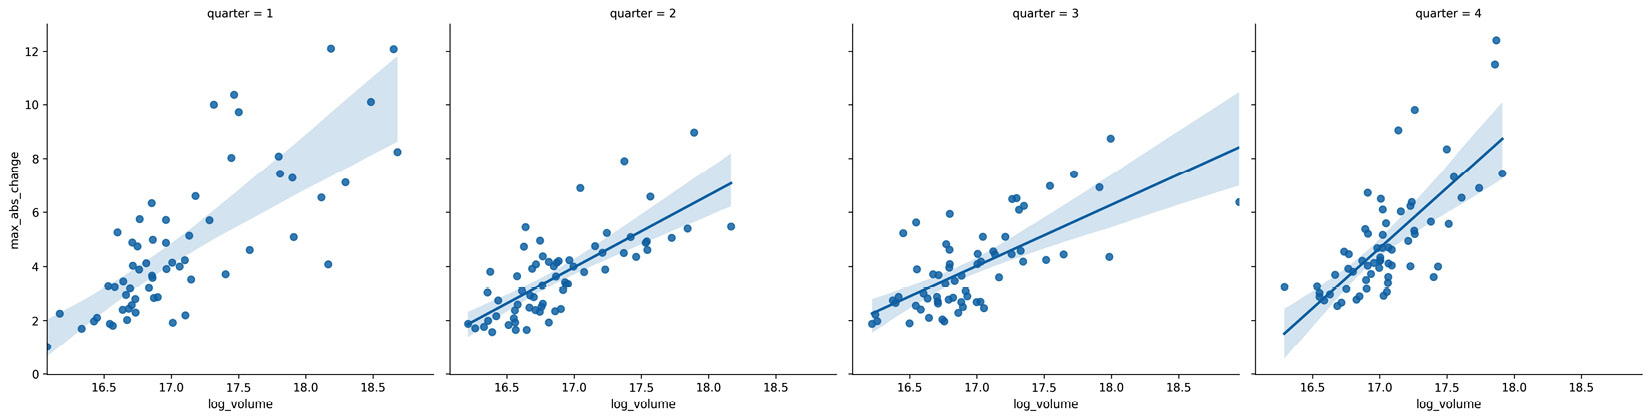 Figure 6.14 – Seaborn linear regression plots with subsets
